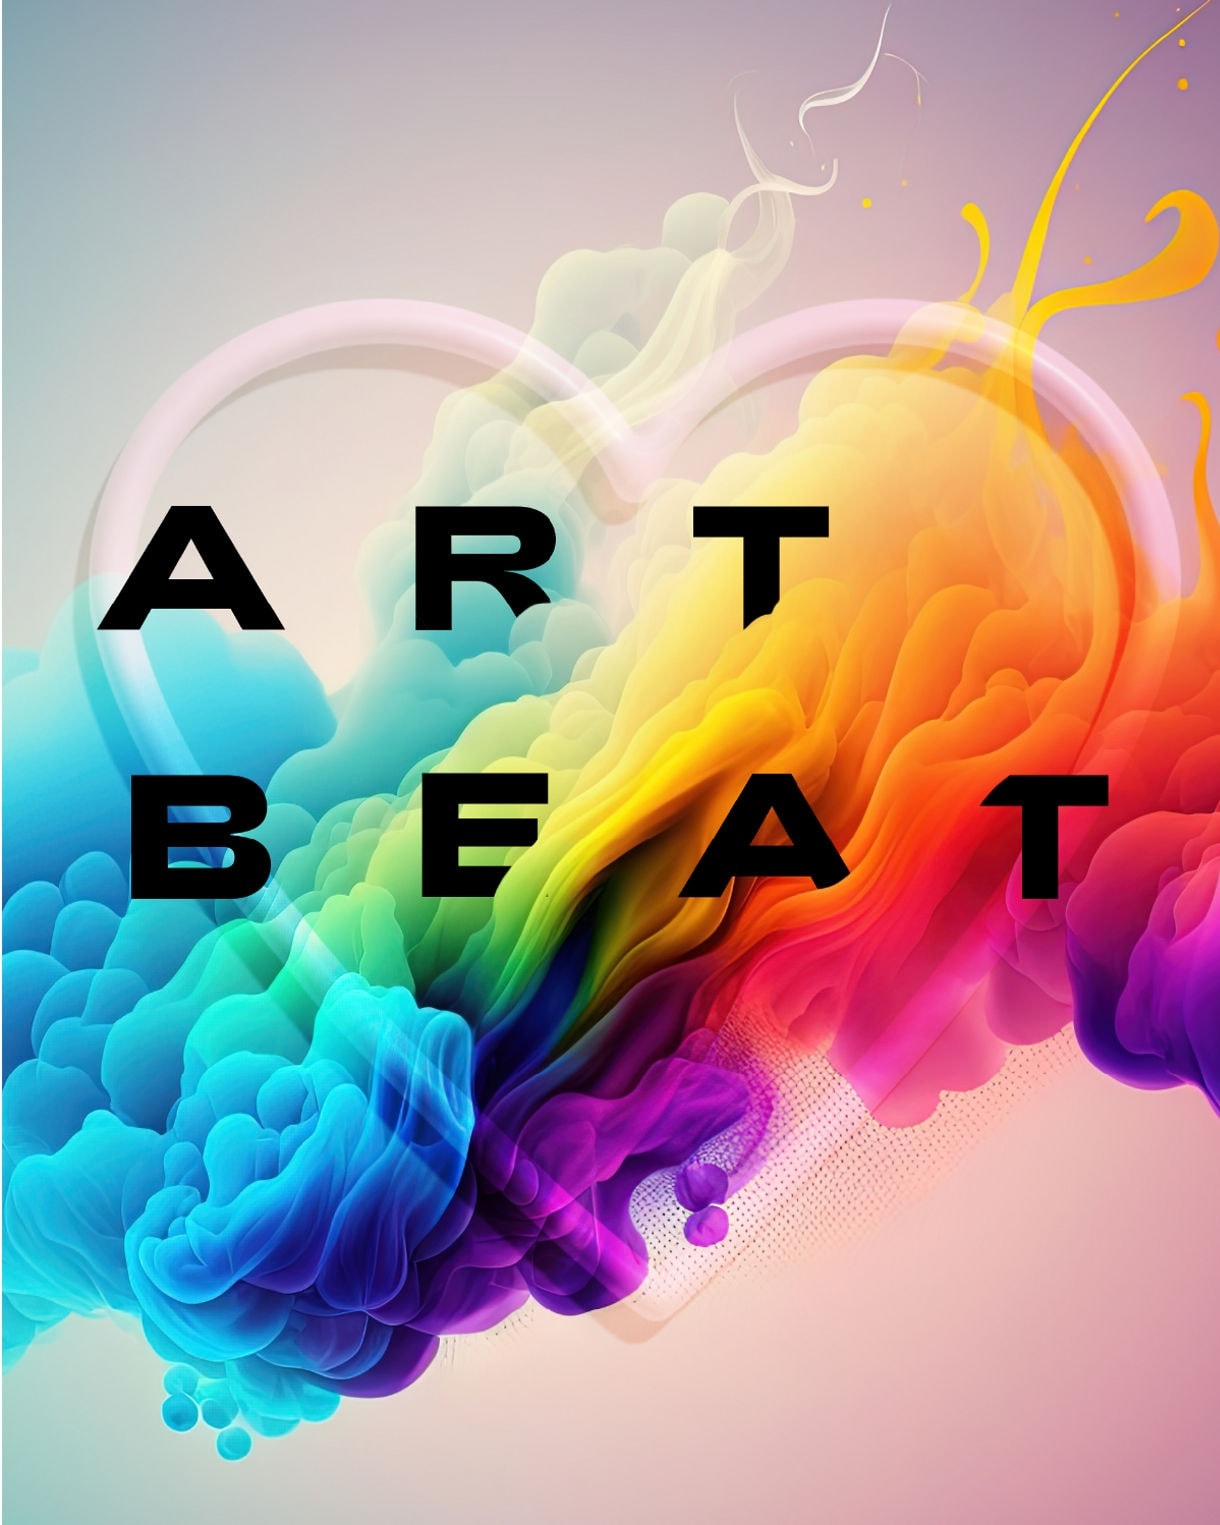 Art Beat: Feel uplifted by the beauty and joy of living life in full color.